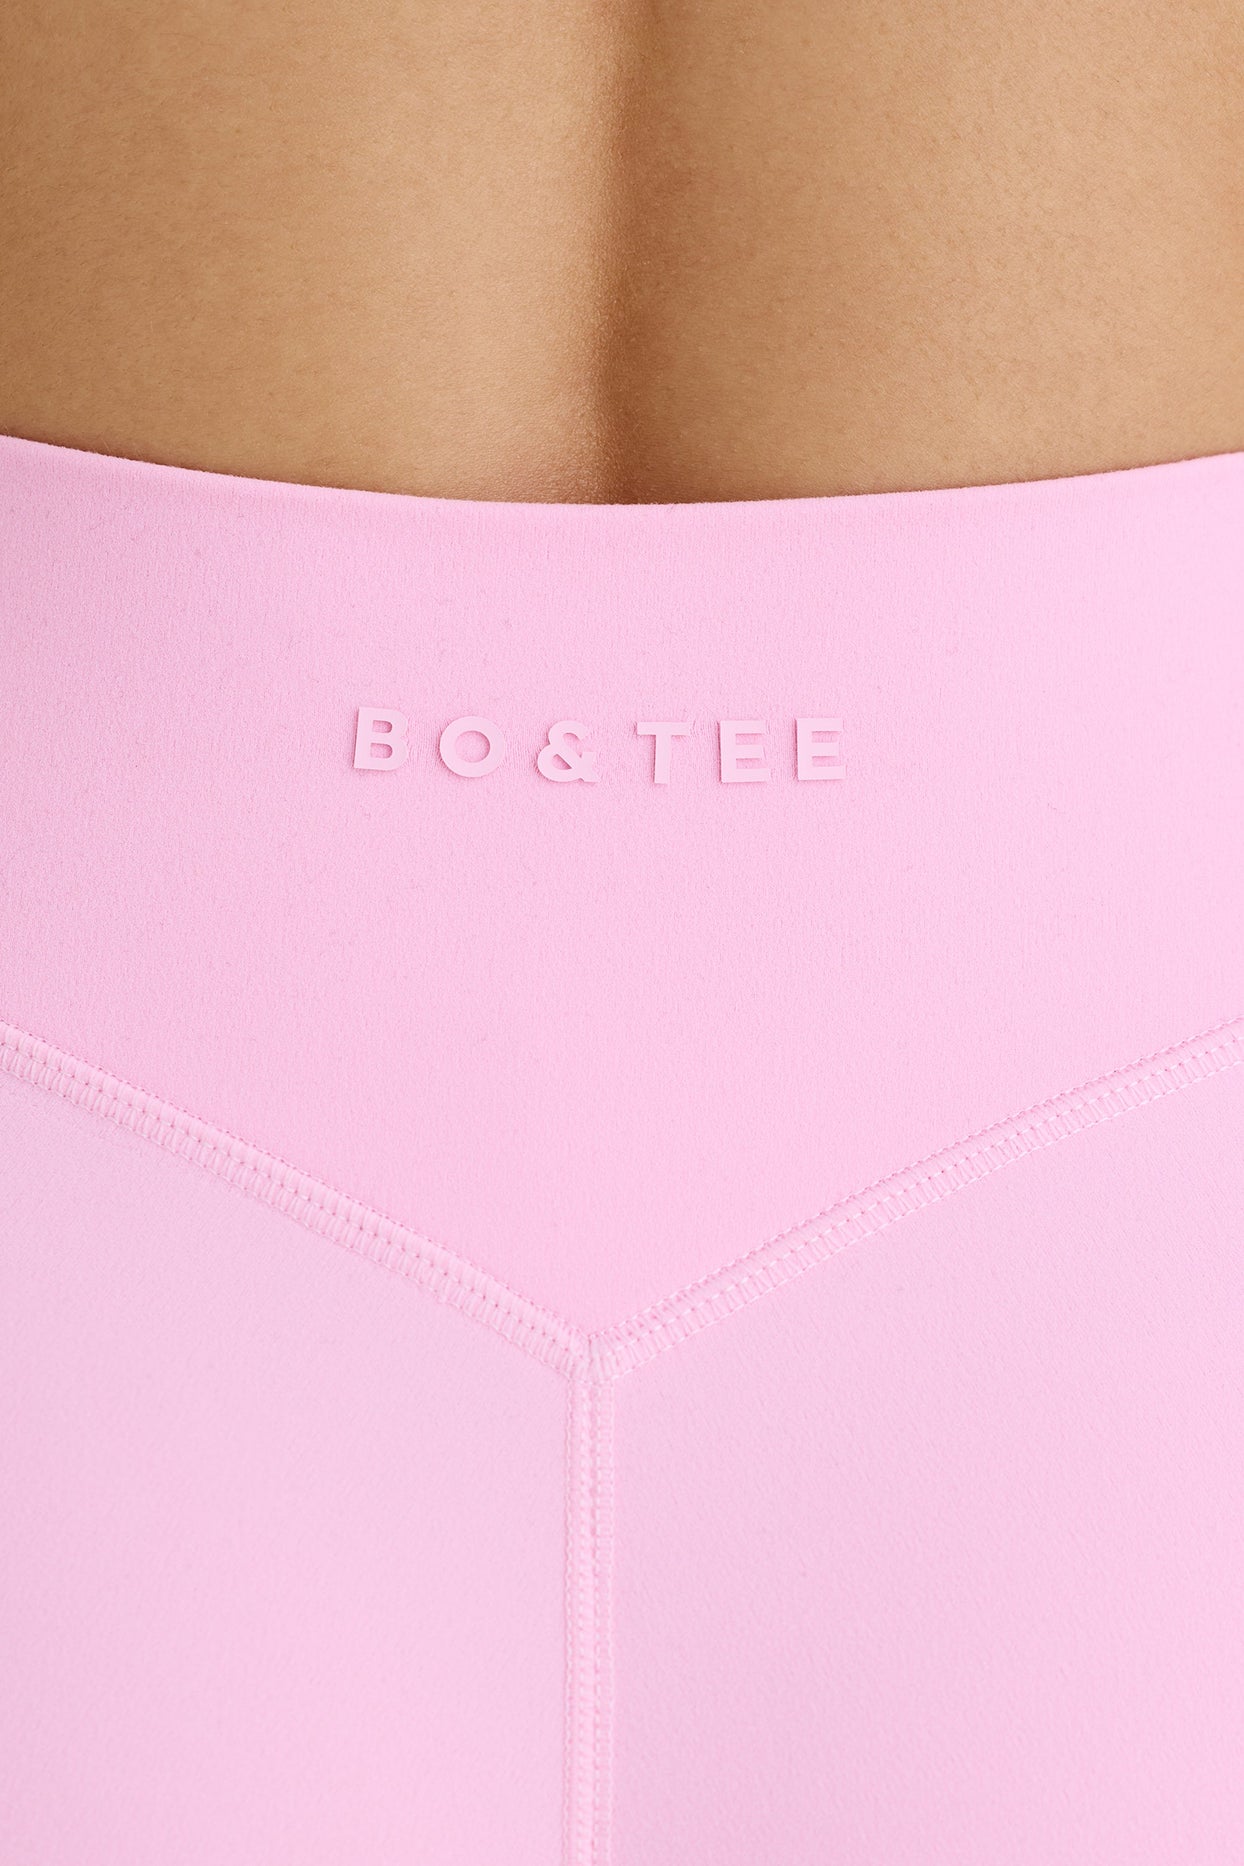 Soft Active Crossover Mini Shorts in Bubblegum Pink